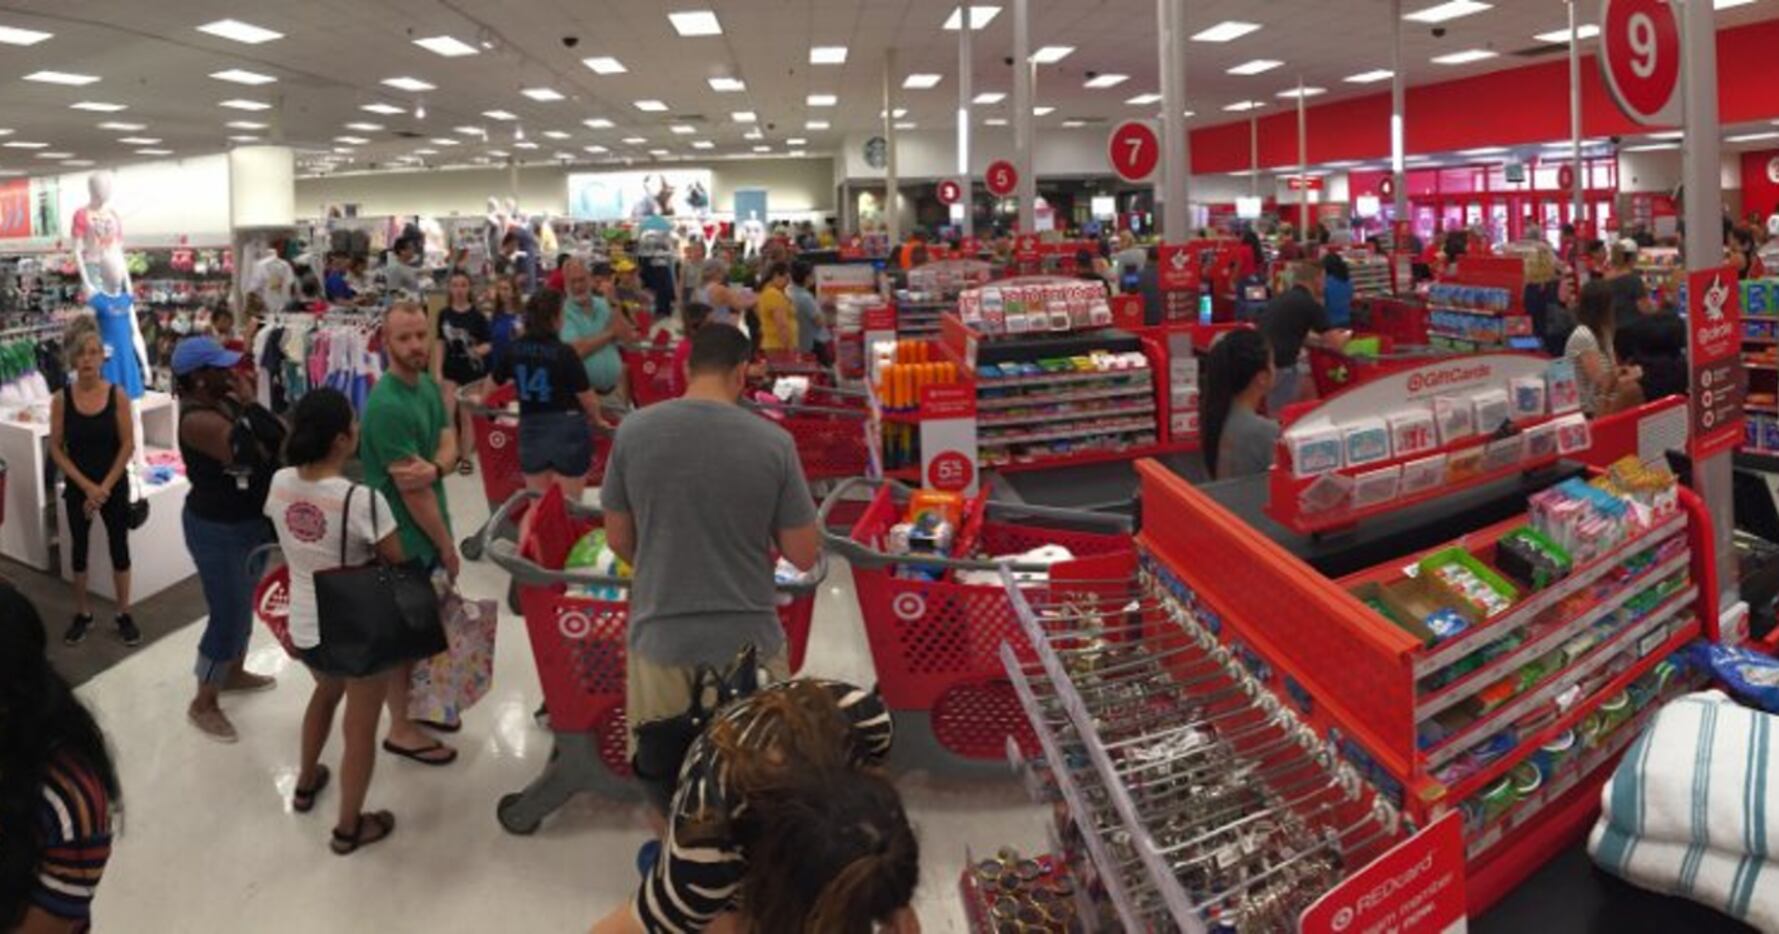 The system glitch clogged checkout aisles at the Cityplace Target in Dallas on Saturday..